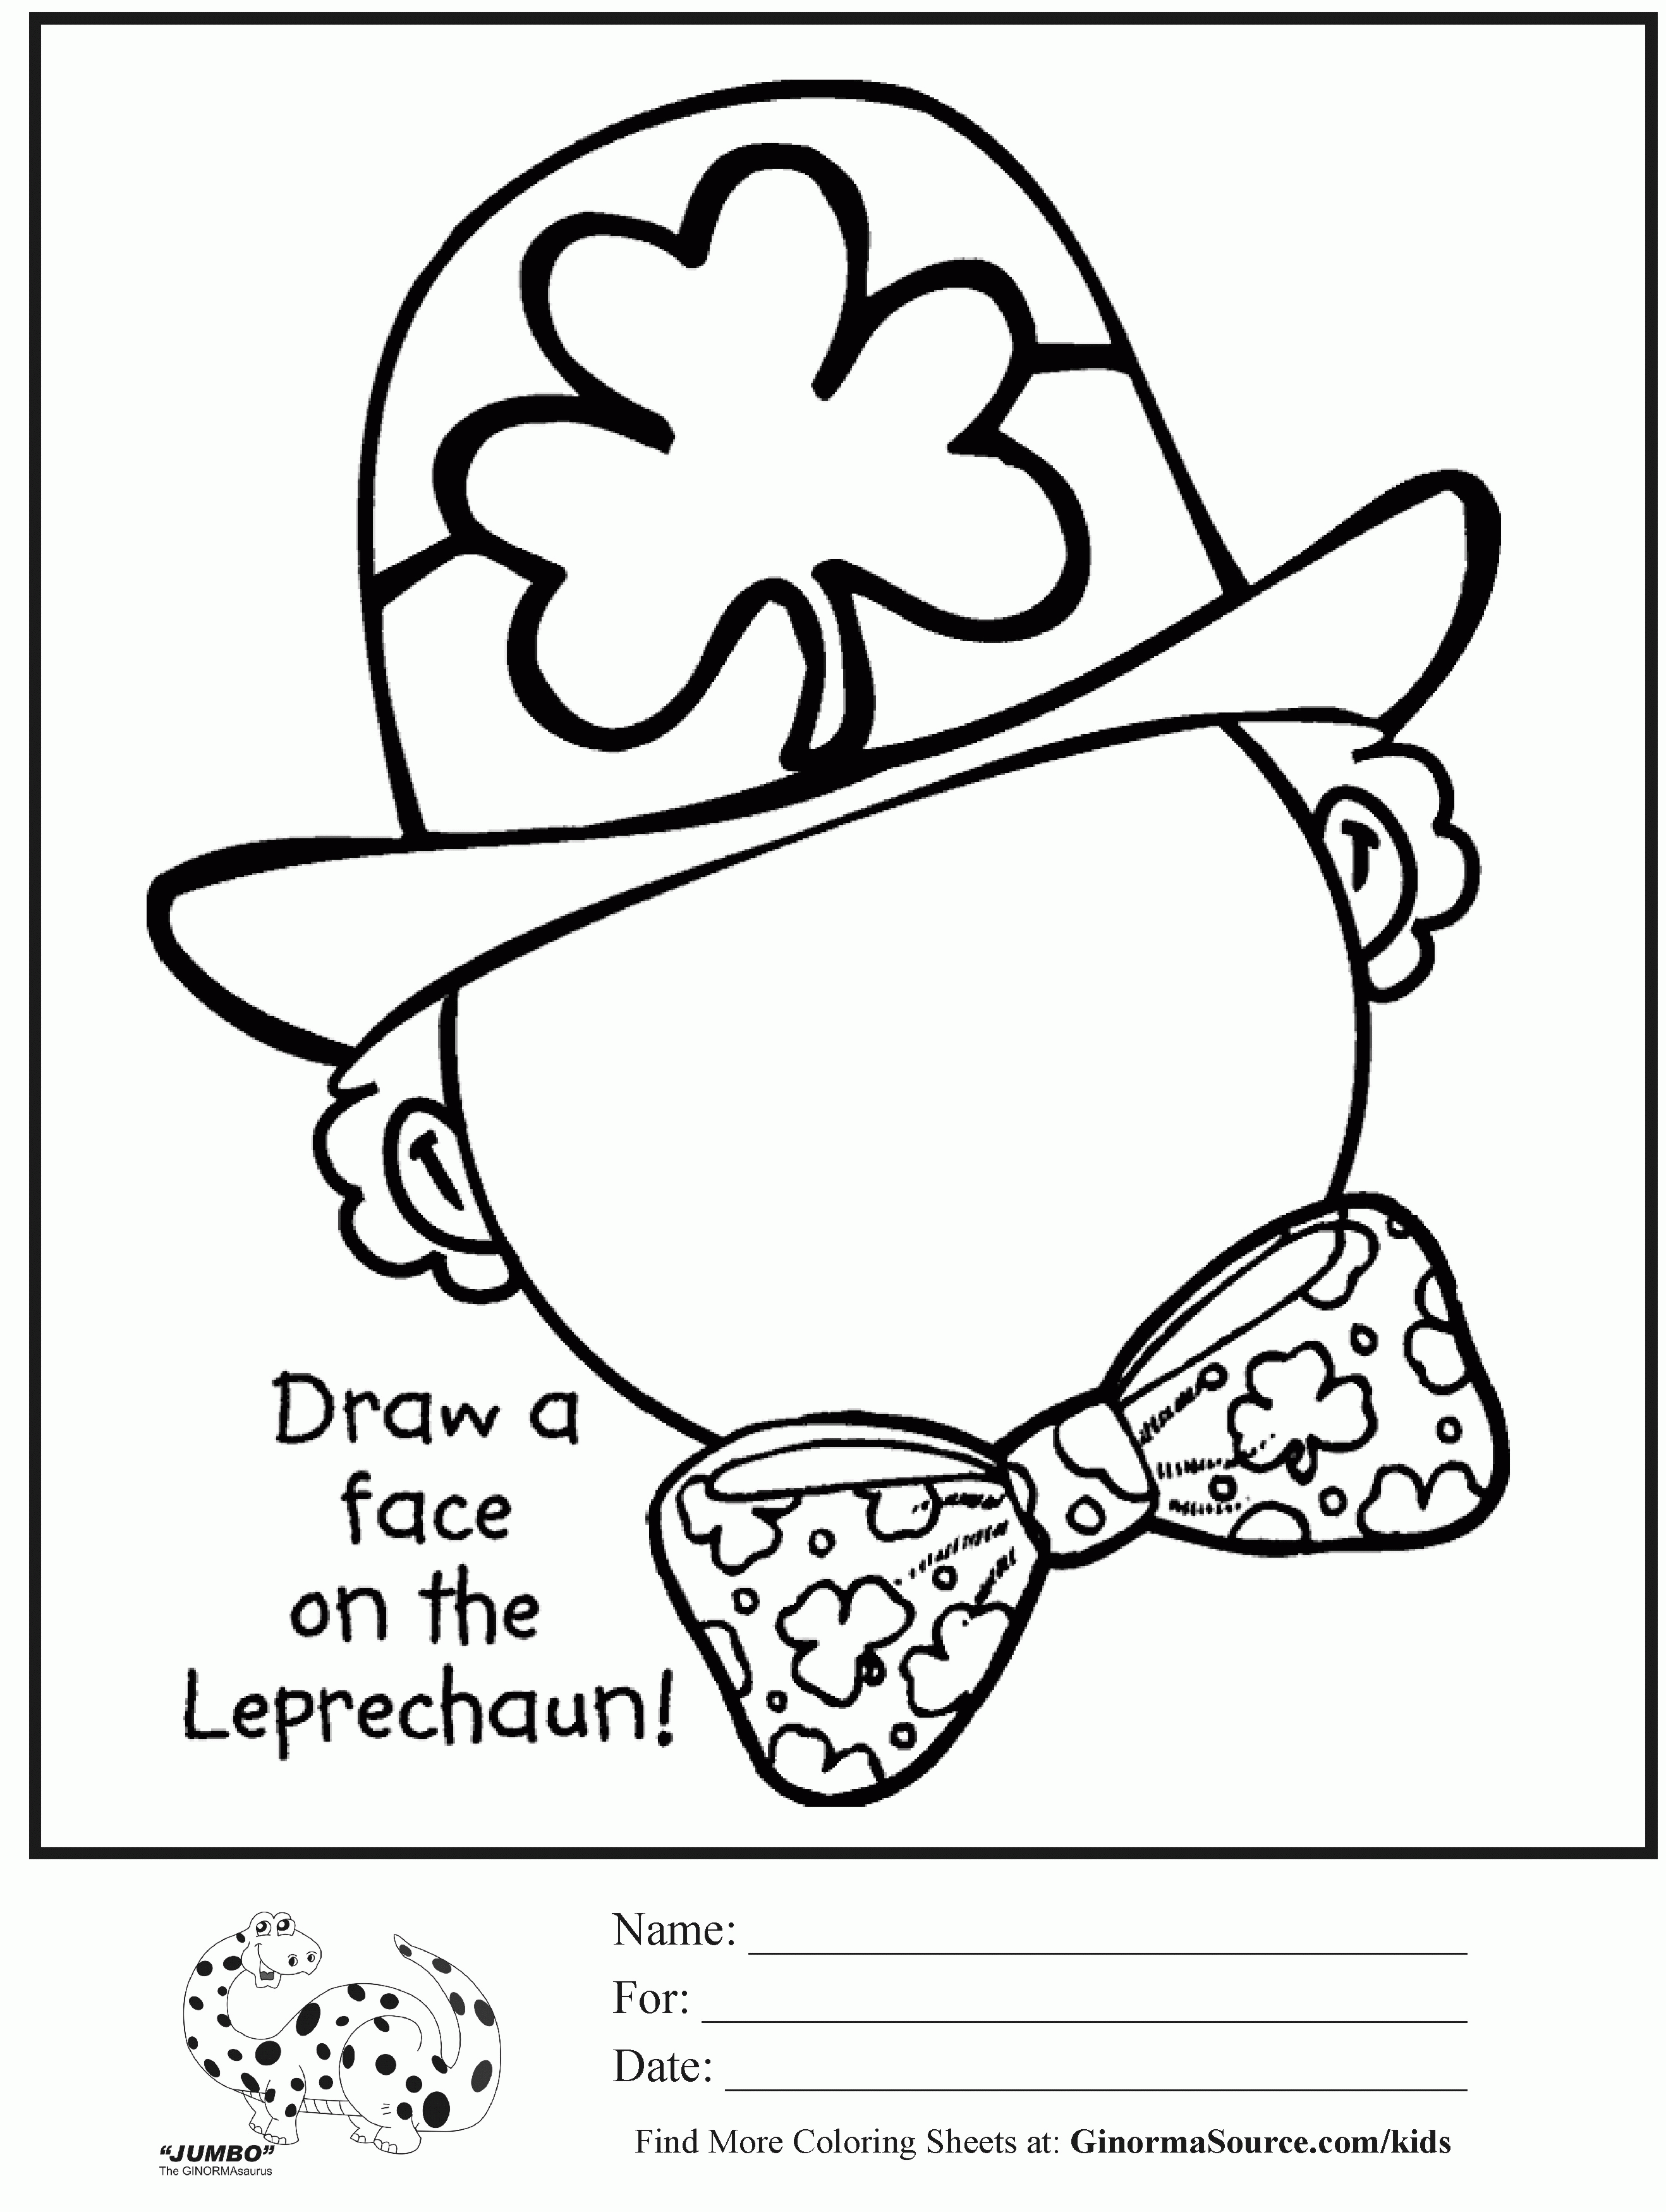 6 Pics of Snoopy St. Patrick's Day Coloring Pages - St. Patrick's ...